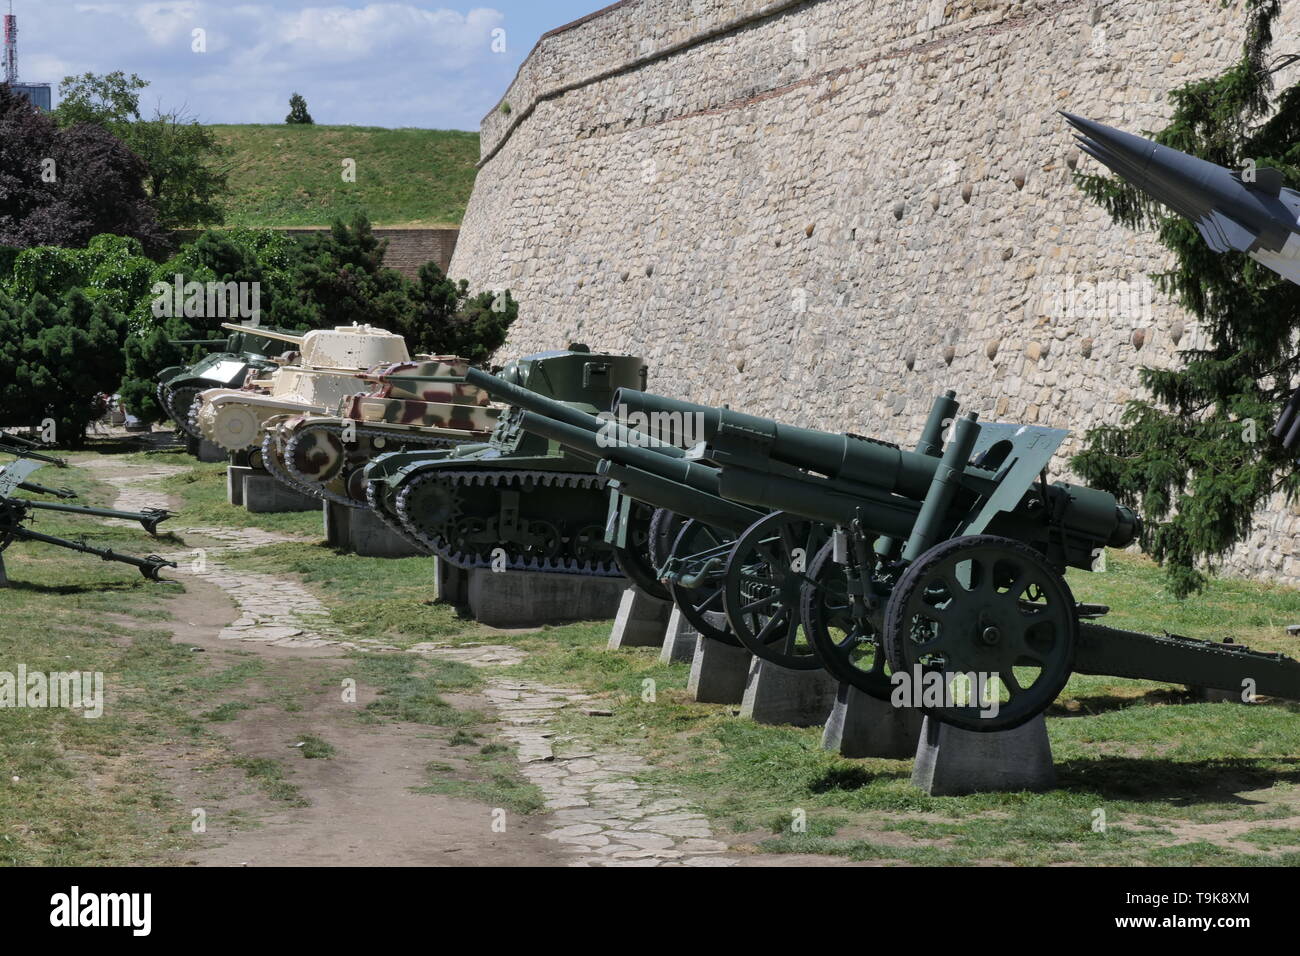 Military weapons at the entrance of the Belgrade Fortress, Serbia Stock Photo